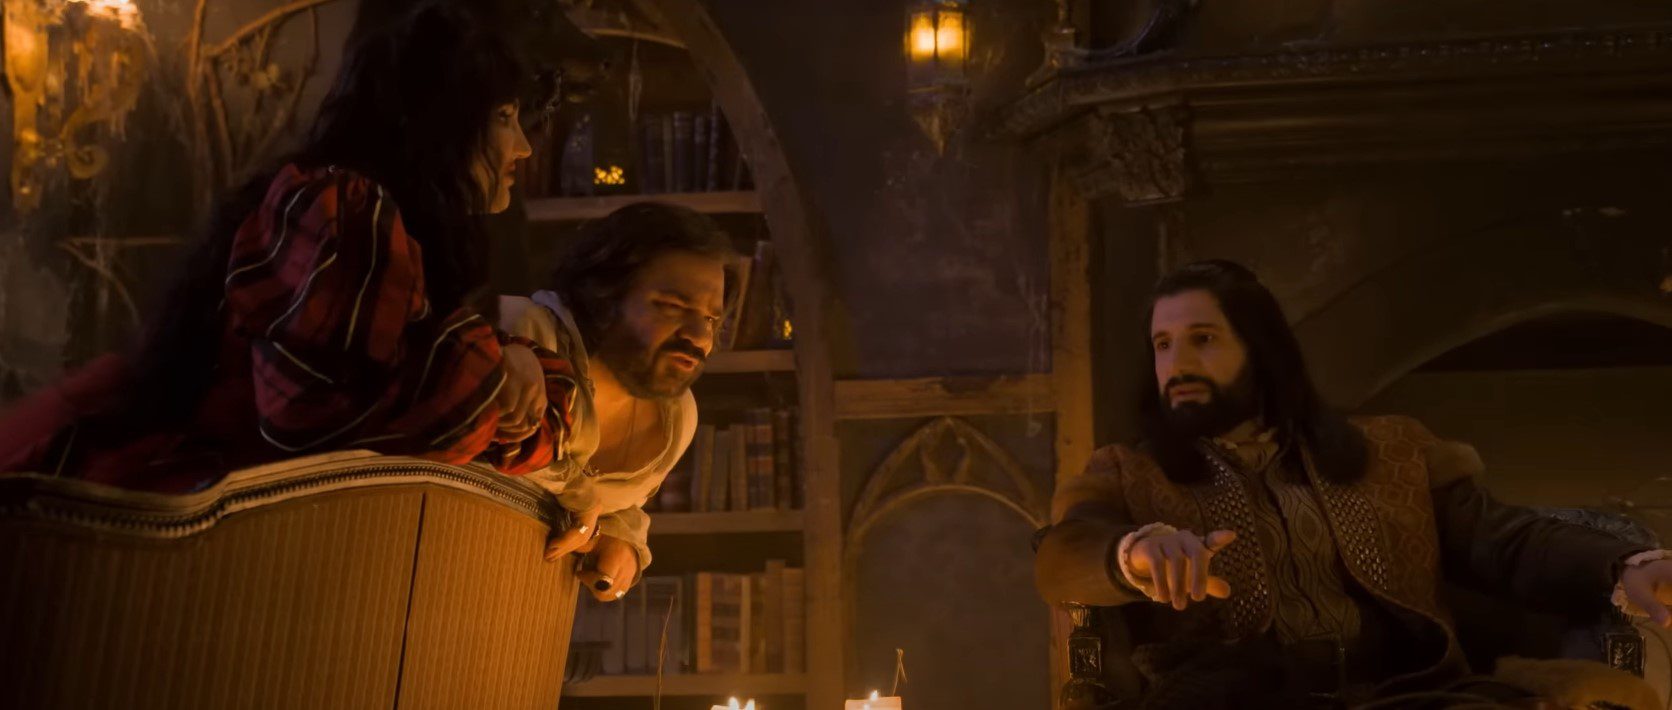 What We Do In The Shadows Season 4 Episode 3